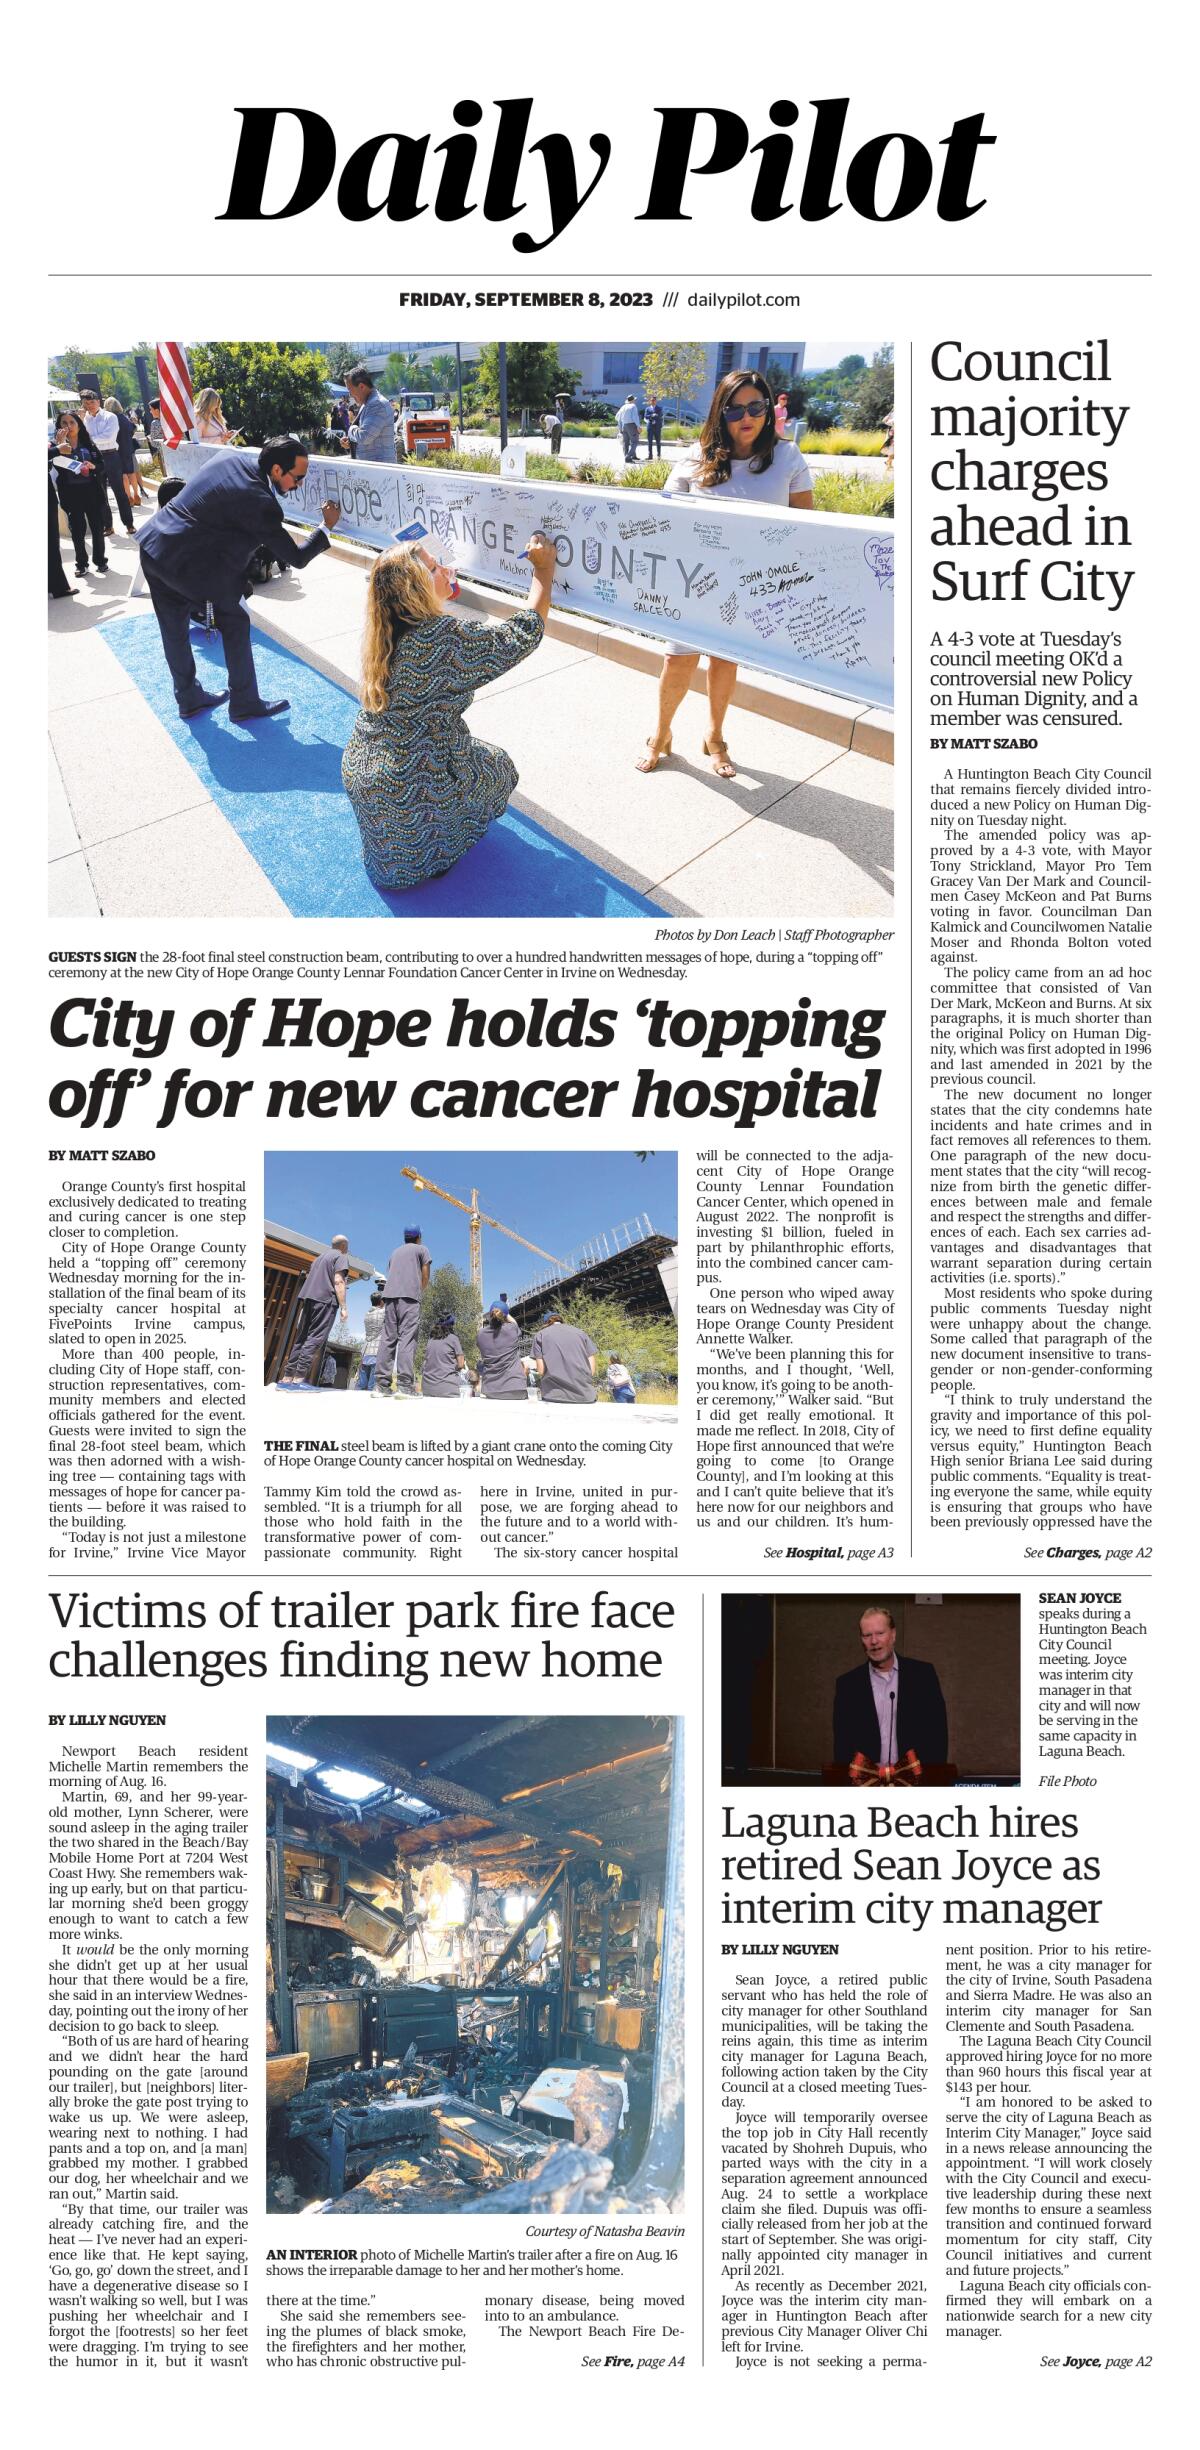 Front page of Daily Pilot e-newspaper for Friday, Sept. 8, 2023.